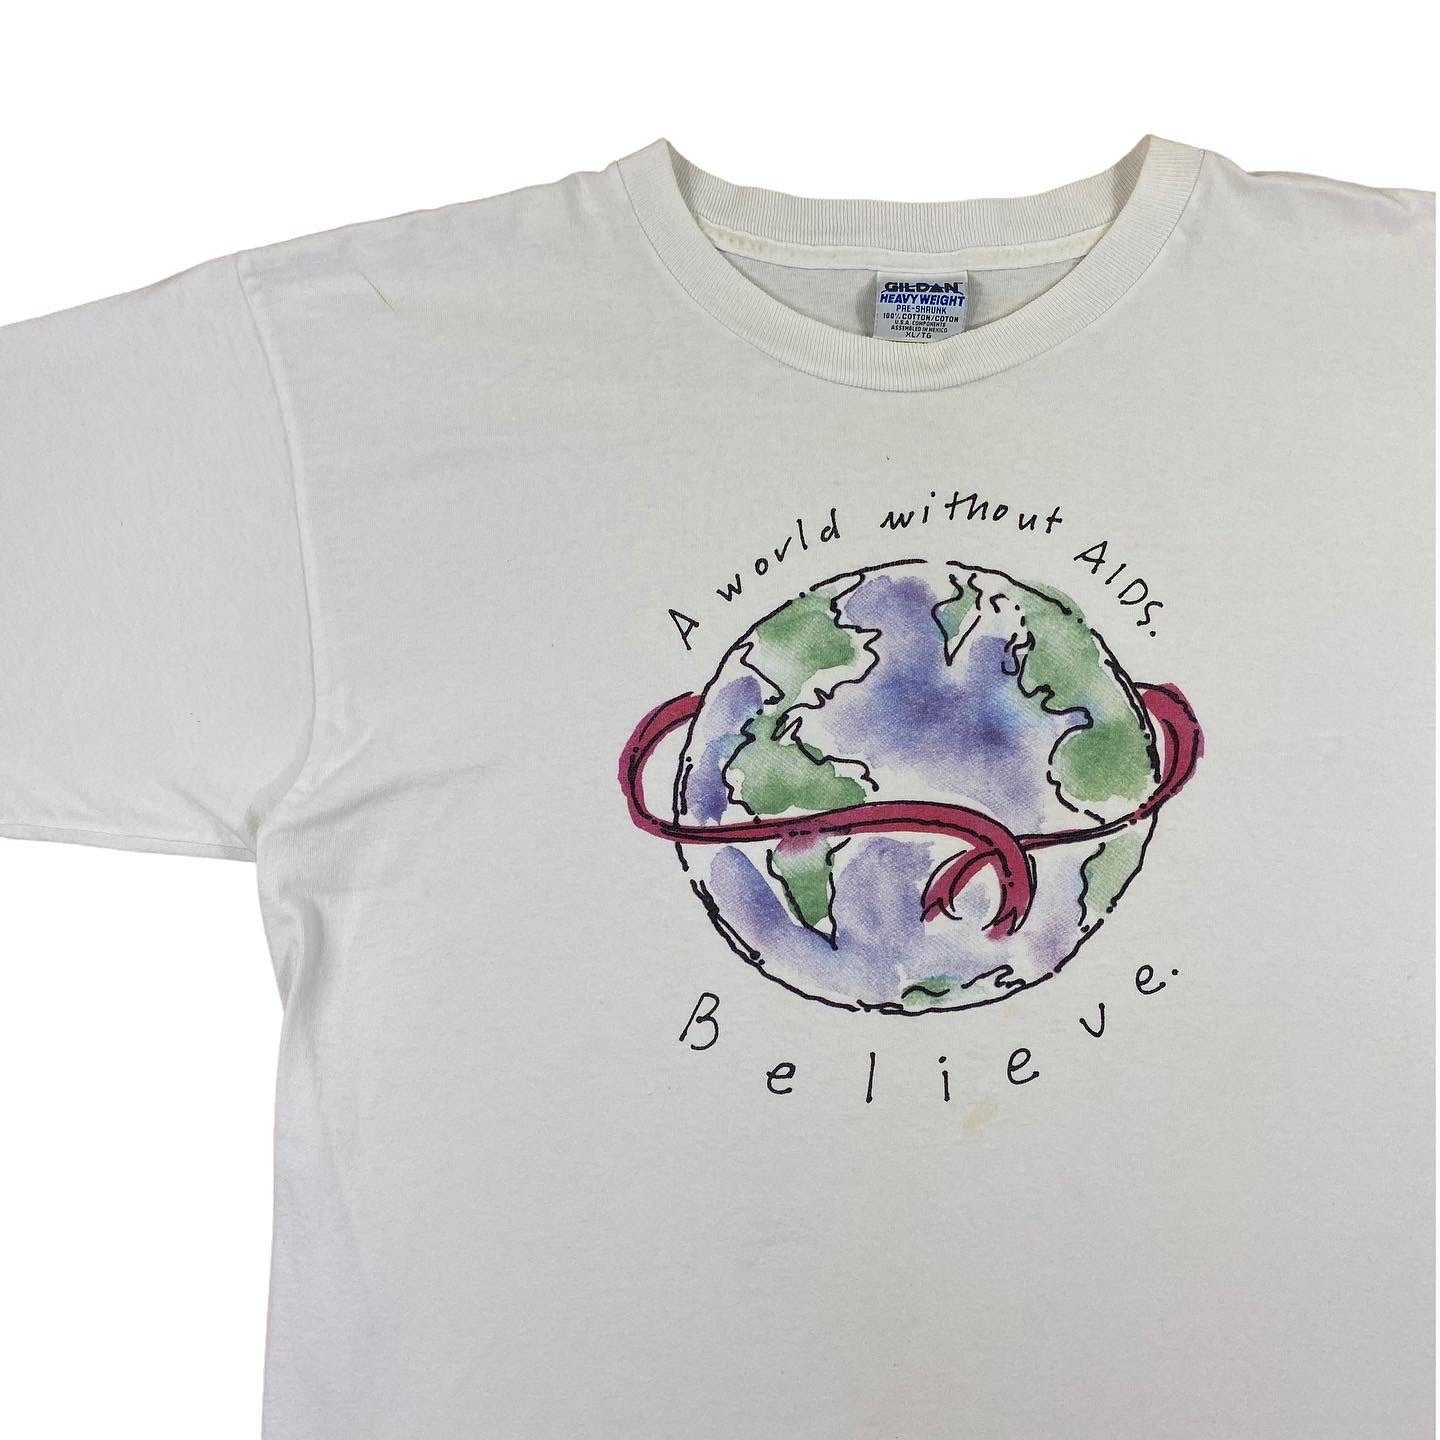 90s A world without Aids tee. XL